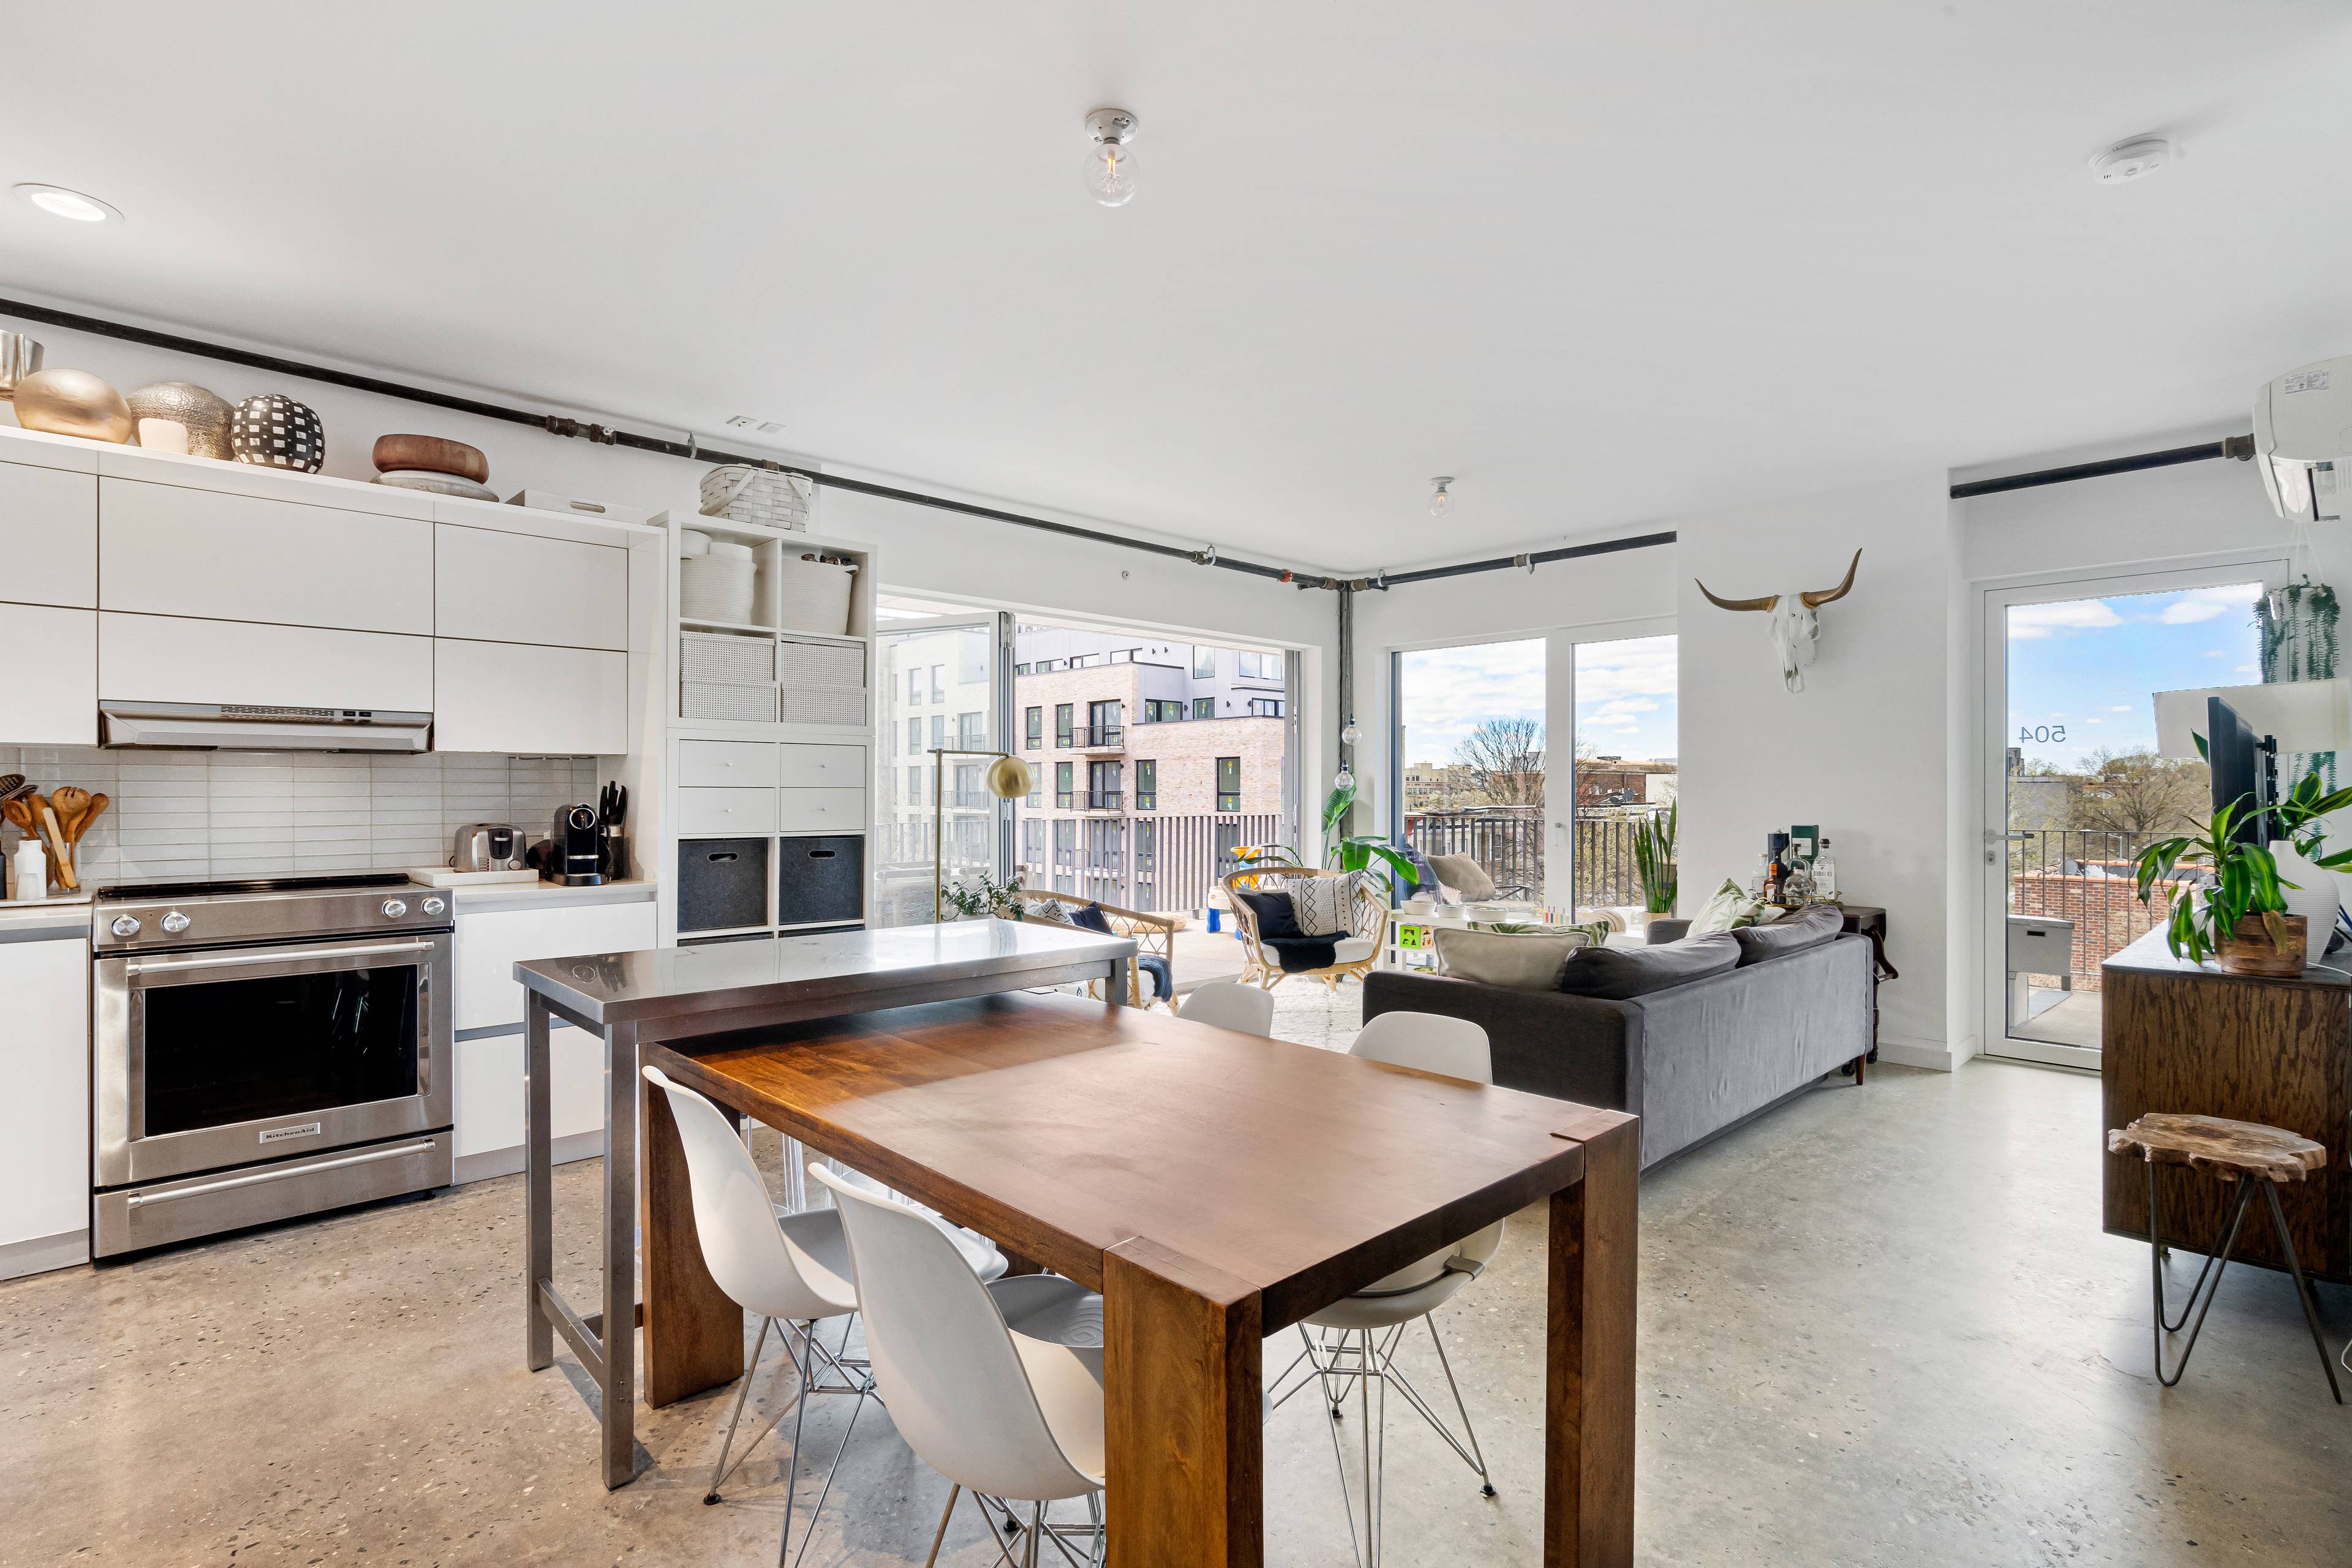 Hello New York located at 651 New York Avenue successfully integrates the richness of lodge style with the sophistication of classic loft living.